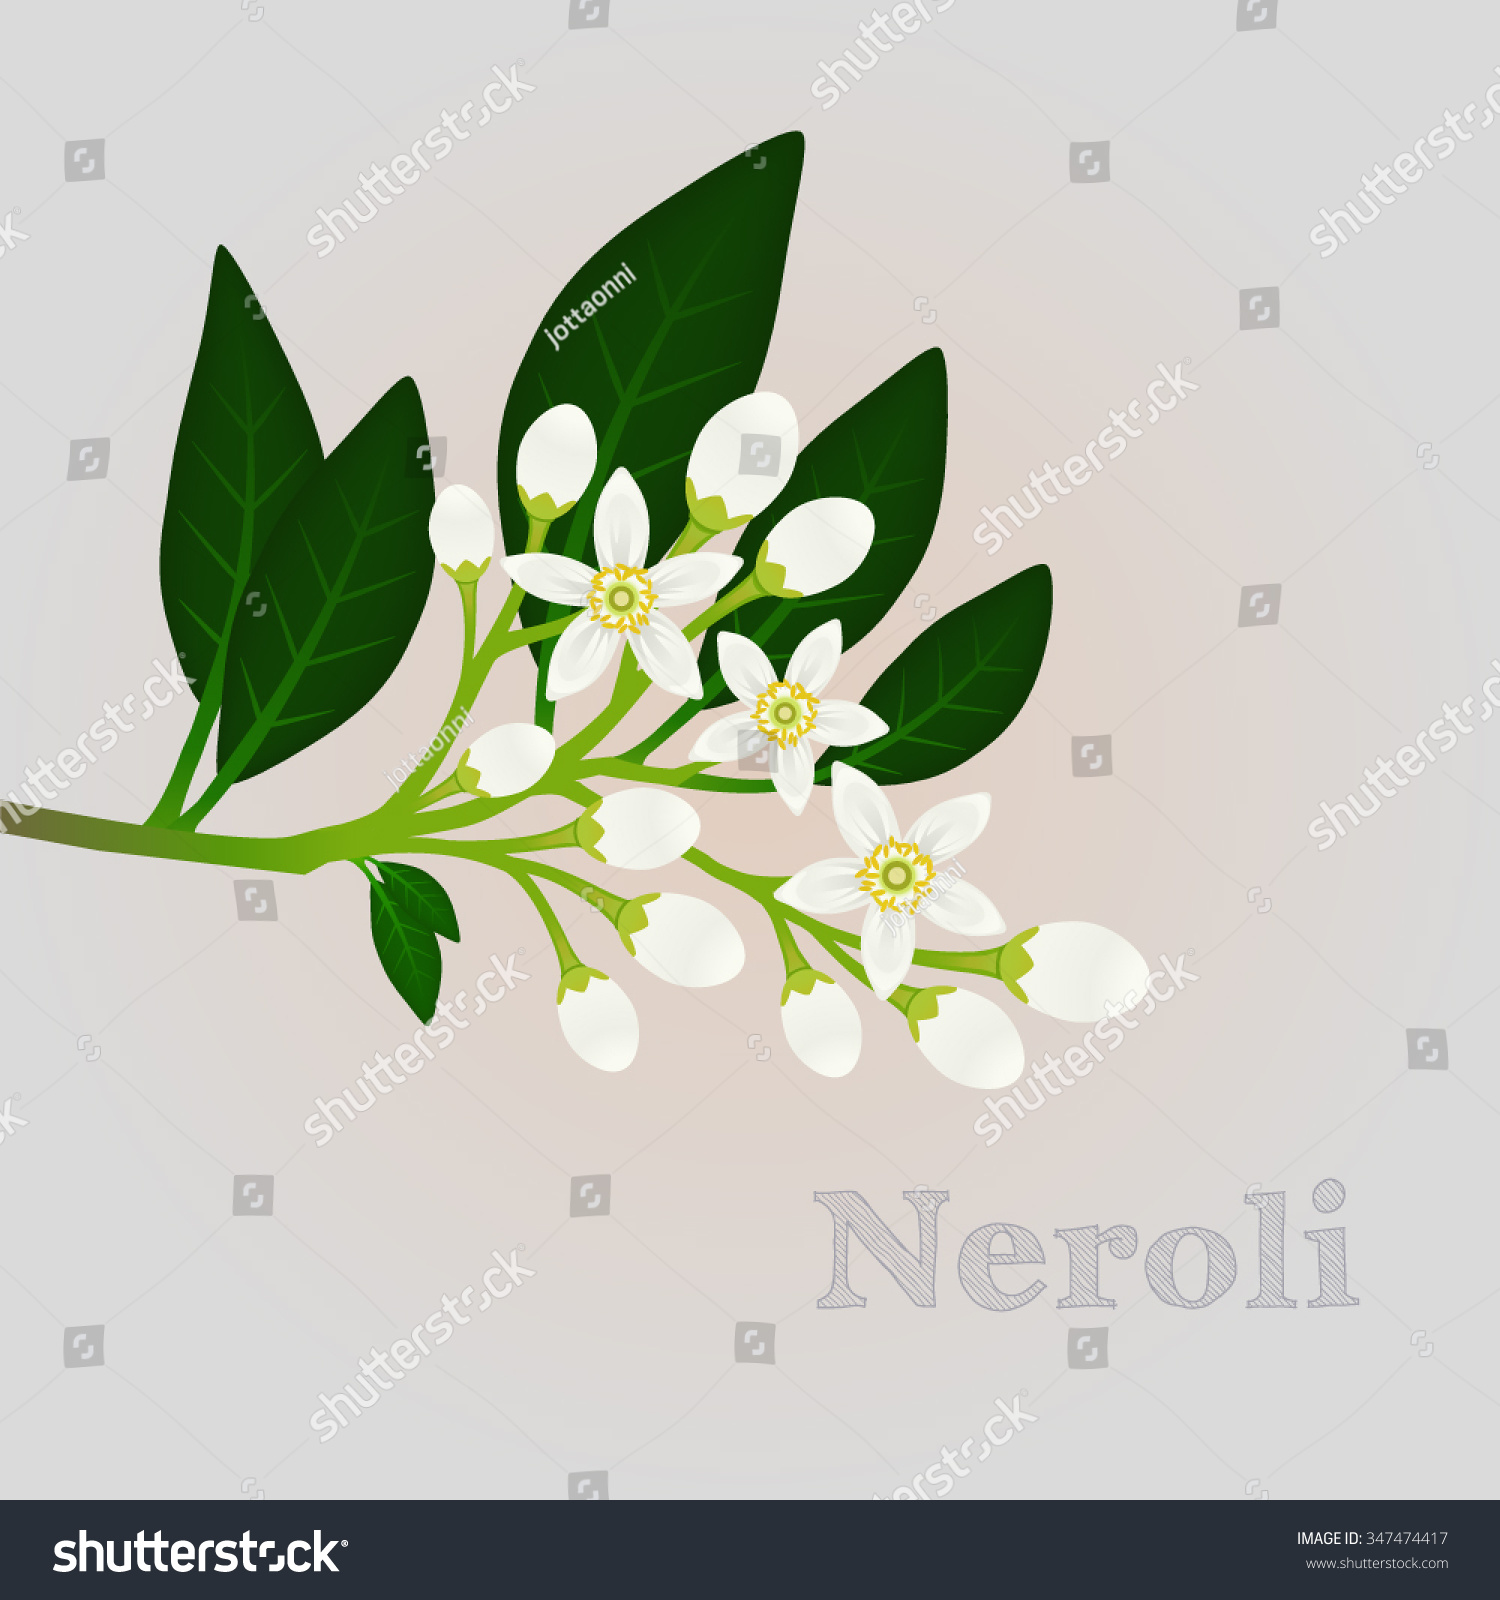 Orange Blossom Branch Flowers Buds Leaves Stock Vector Royalty Free 347474417